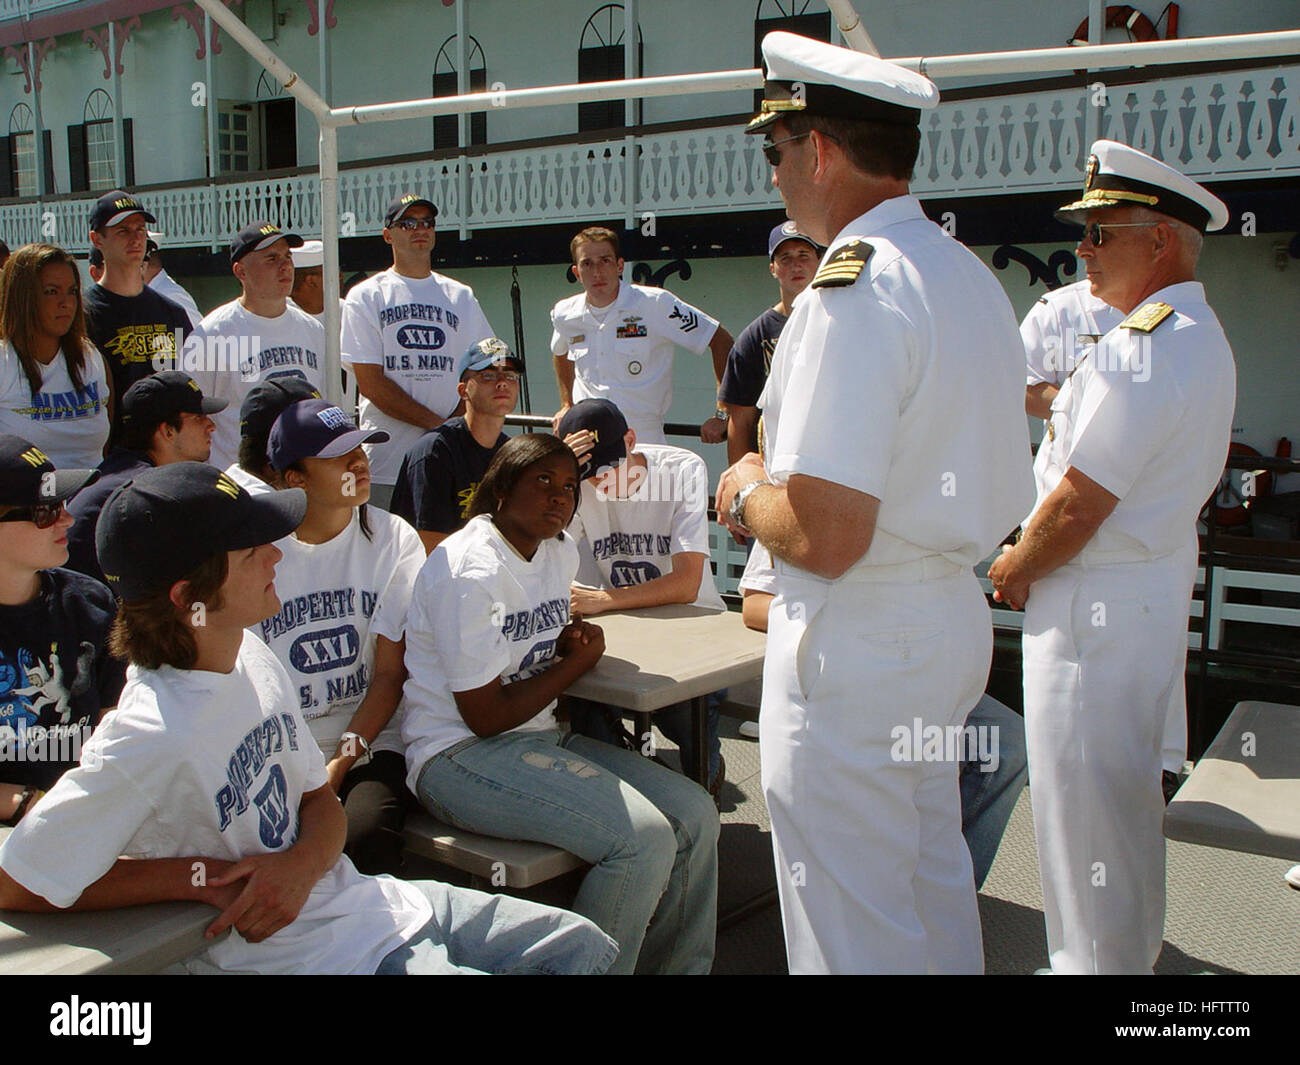 070711-N-2888Q-007  DETROIT (July 11, 2007) - Commander, Naval Surface Forces, Vice Adm. Terrance Etnyre (center) and Commanding Officer, Navy Recruiting District Michigan, Cmdr. Greg Maguire talk to a group of Delayed Entry Program members aboard U.S. Naval Sea Cadet training ship Grayfox (TWR 825). Grayfox is conducting cruises at part of Navy Week Detroit. The week is one of 26 Navy Weeks planned across America in 2007. Navy Weeks are designed to show Americans the investment they have made in their Navy and increase awareness in cities that do not have a significant Navy presence. U.S. Nav Stock Photo